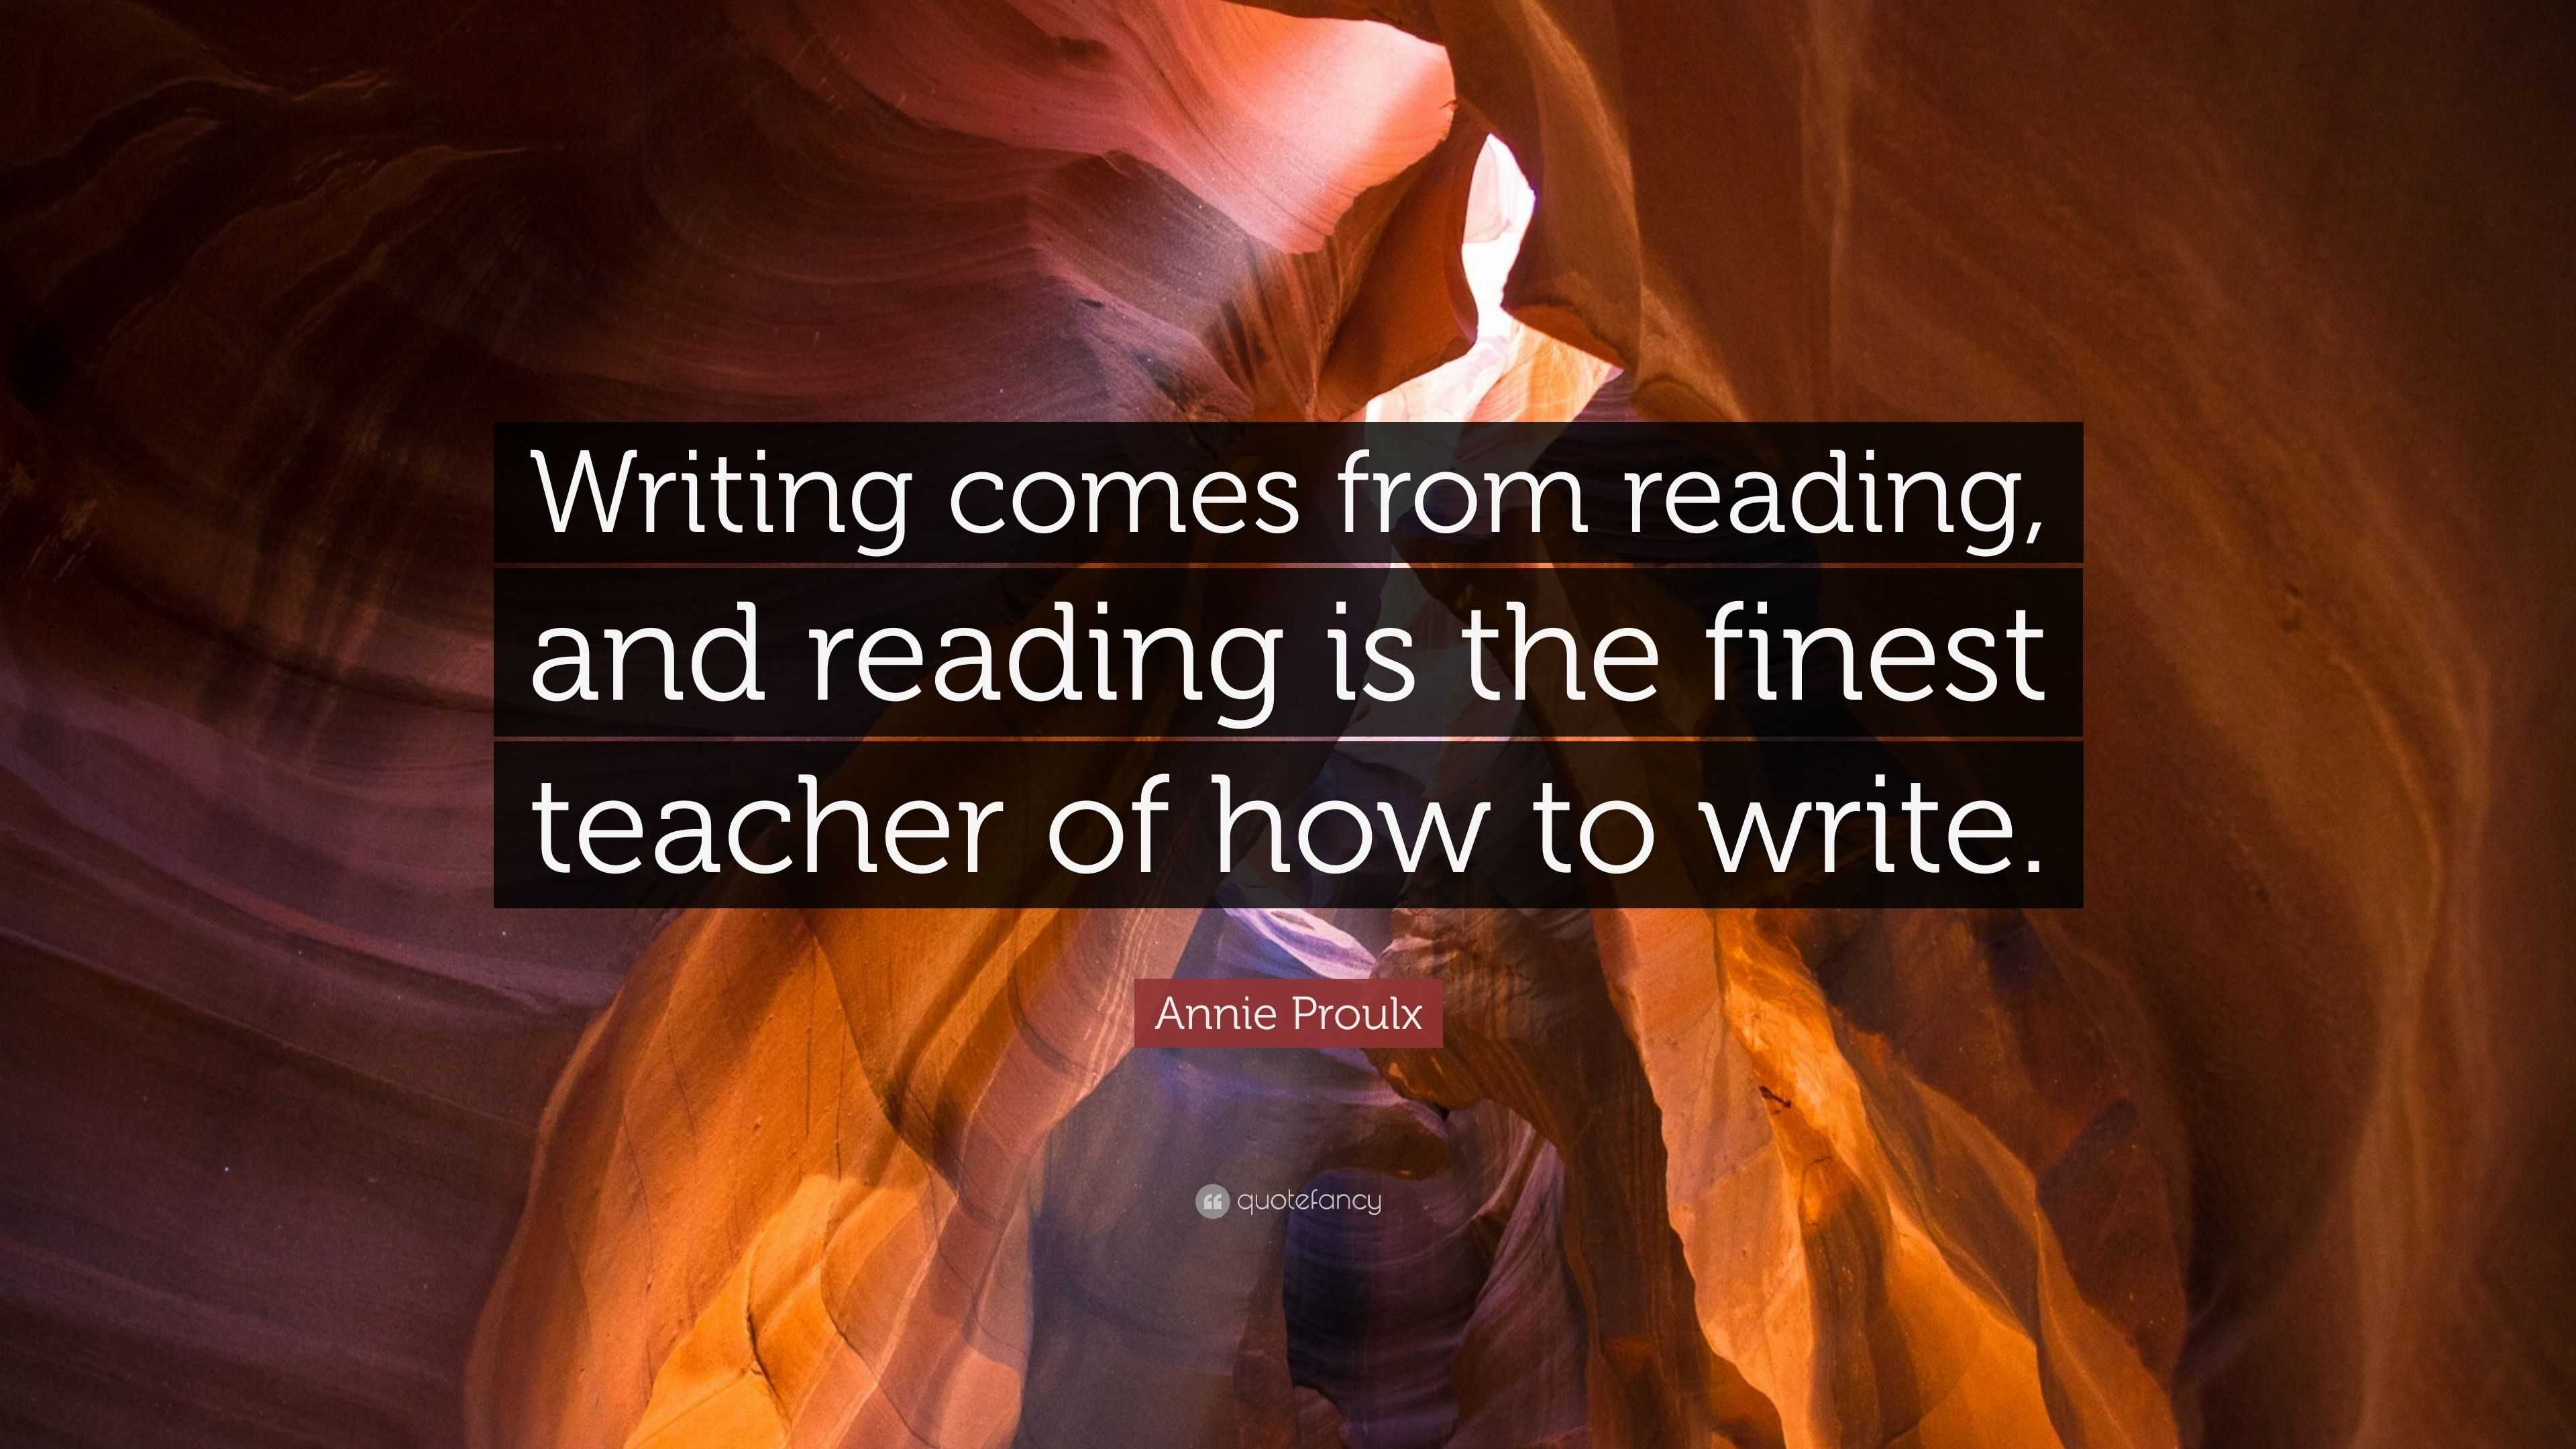 Annie Proulx Quote: "Writing comes from reading, and ...